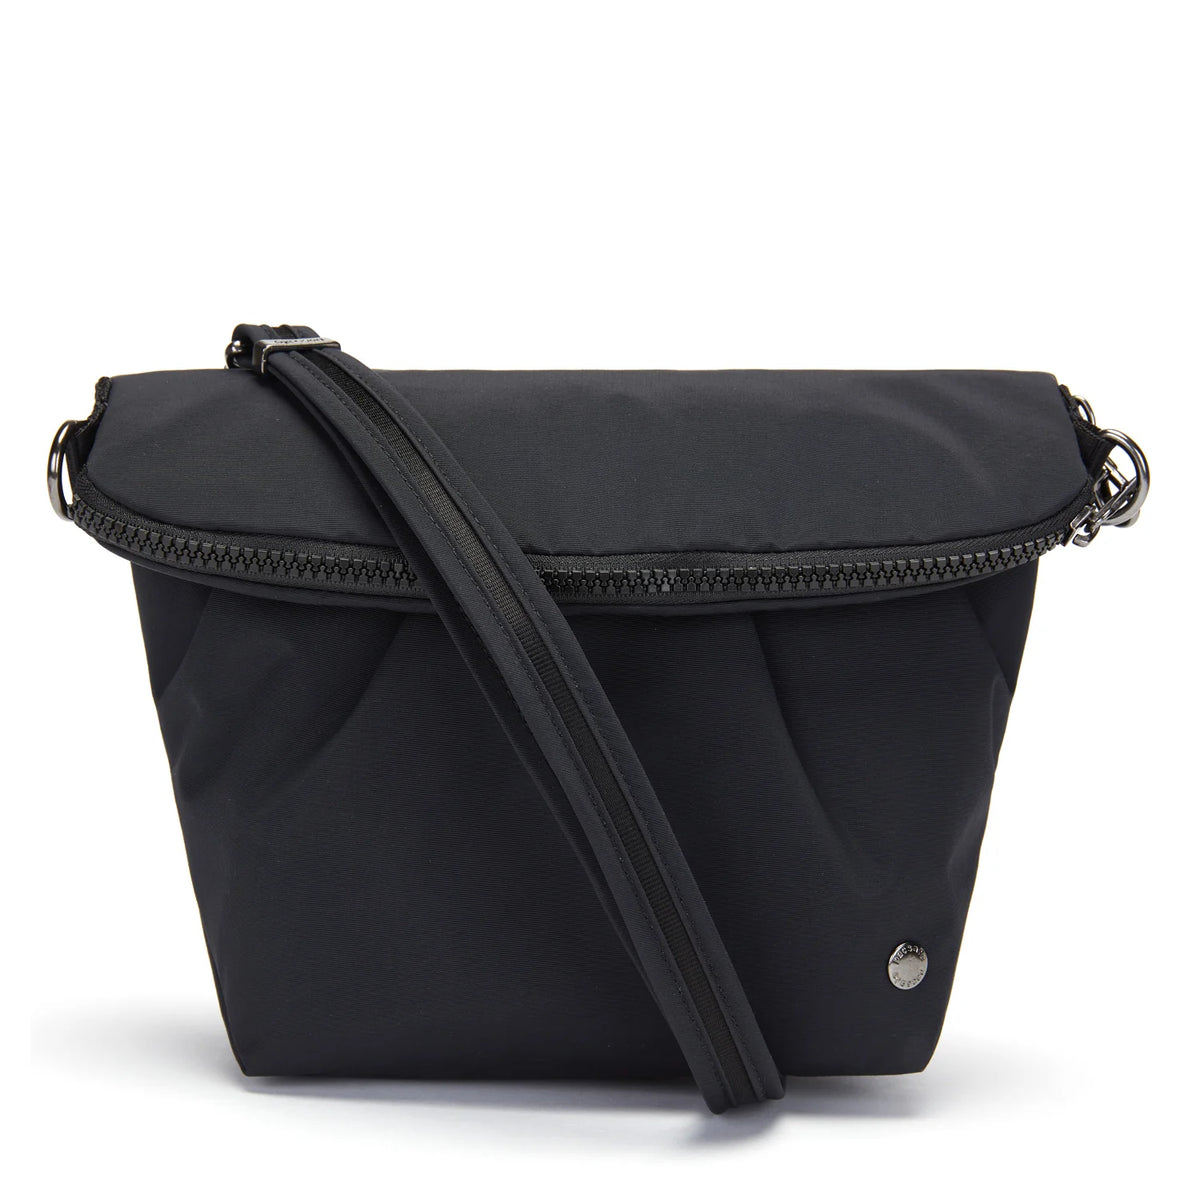 Anti-Theft Classic Convertible Crossbody and Waist Pack